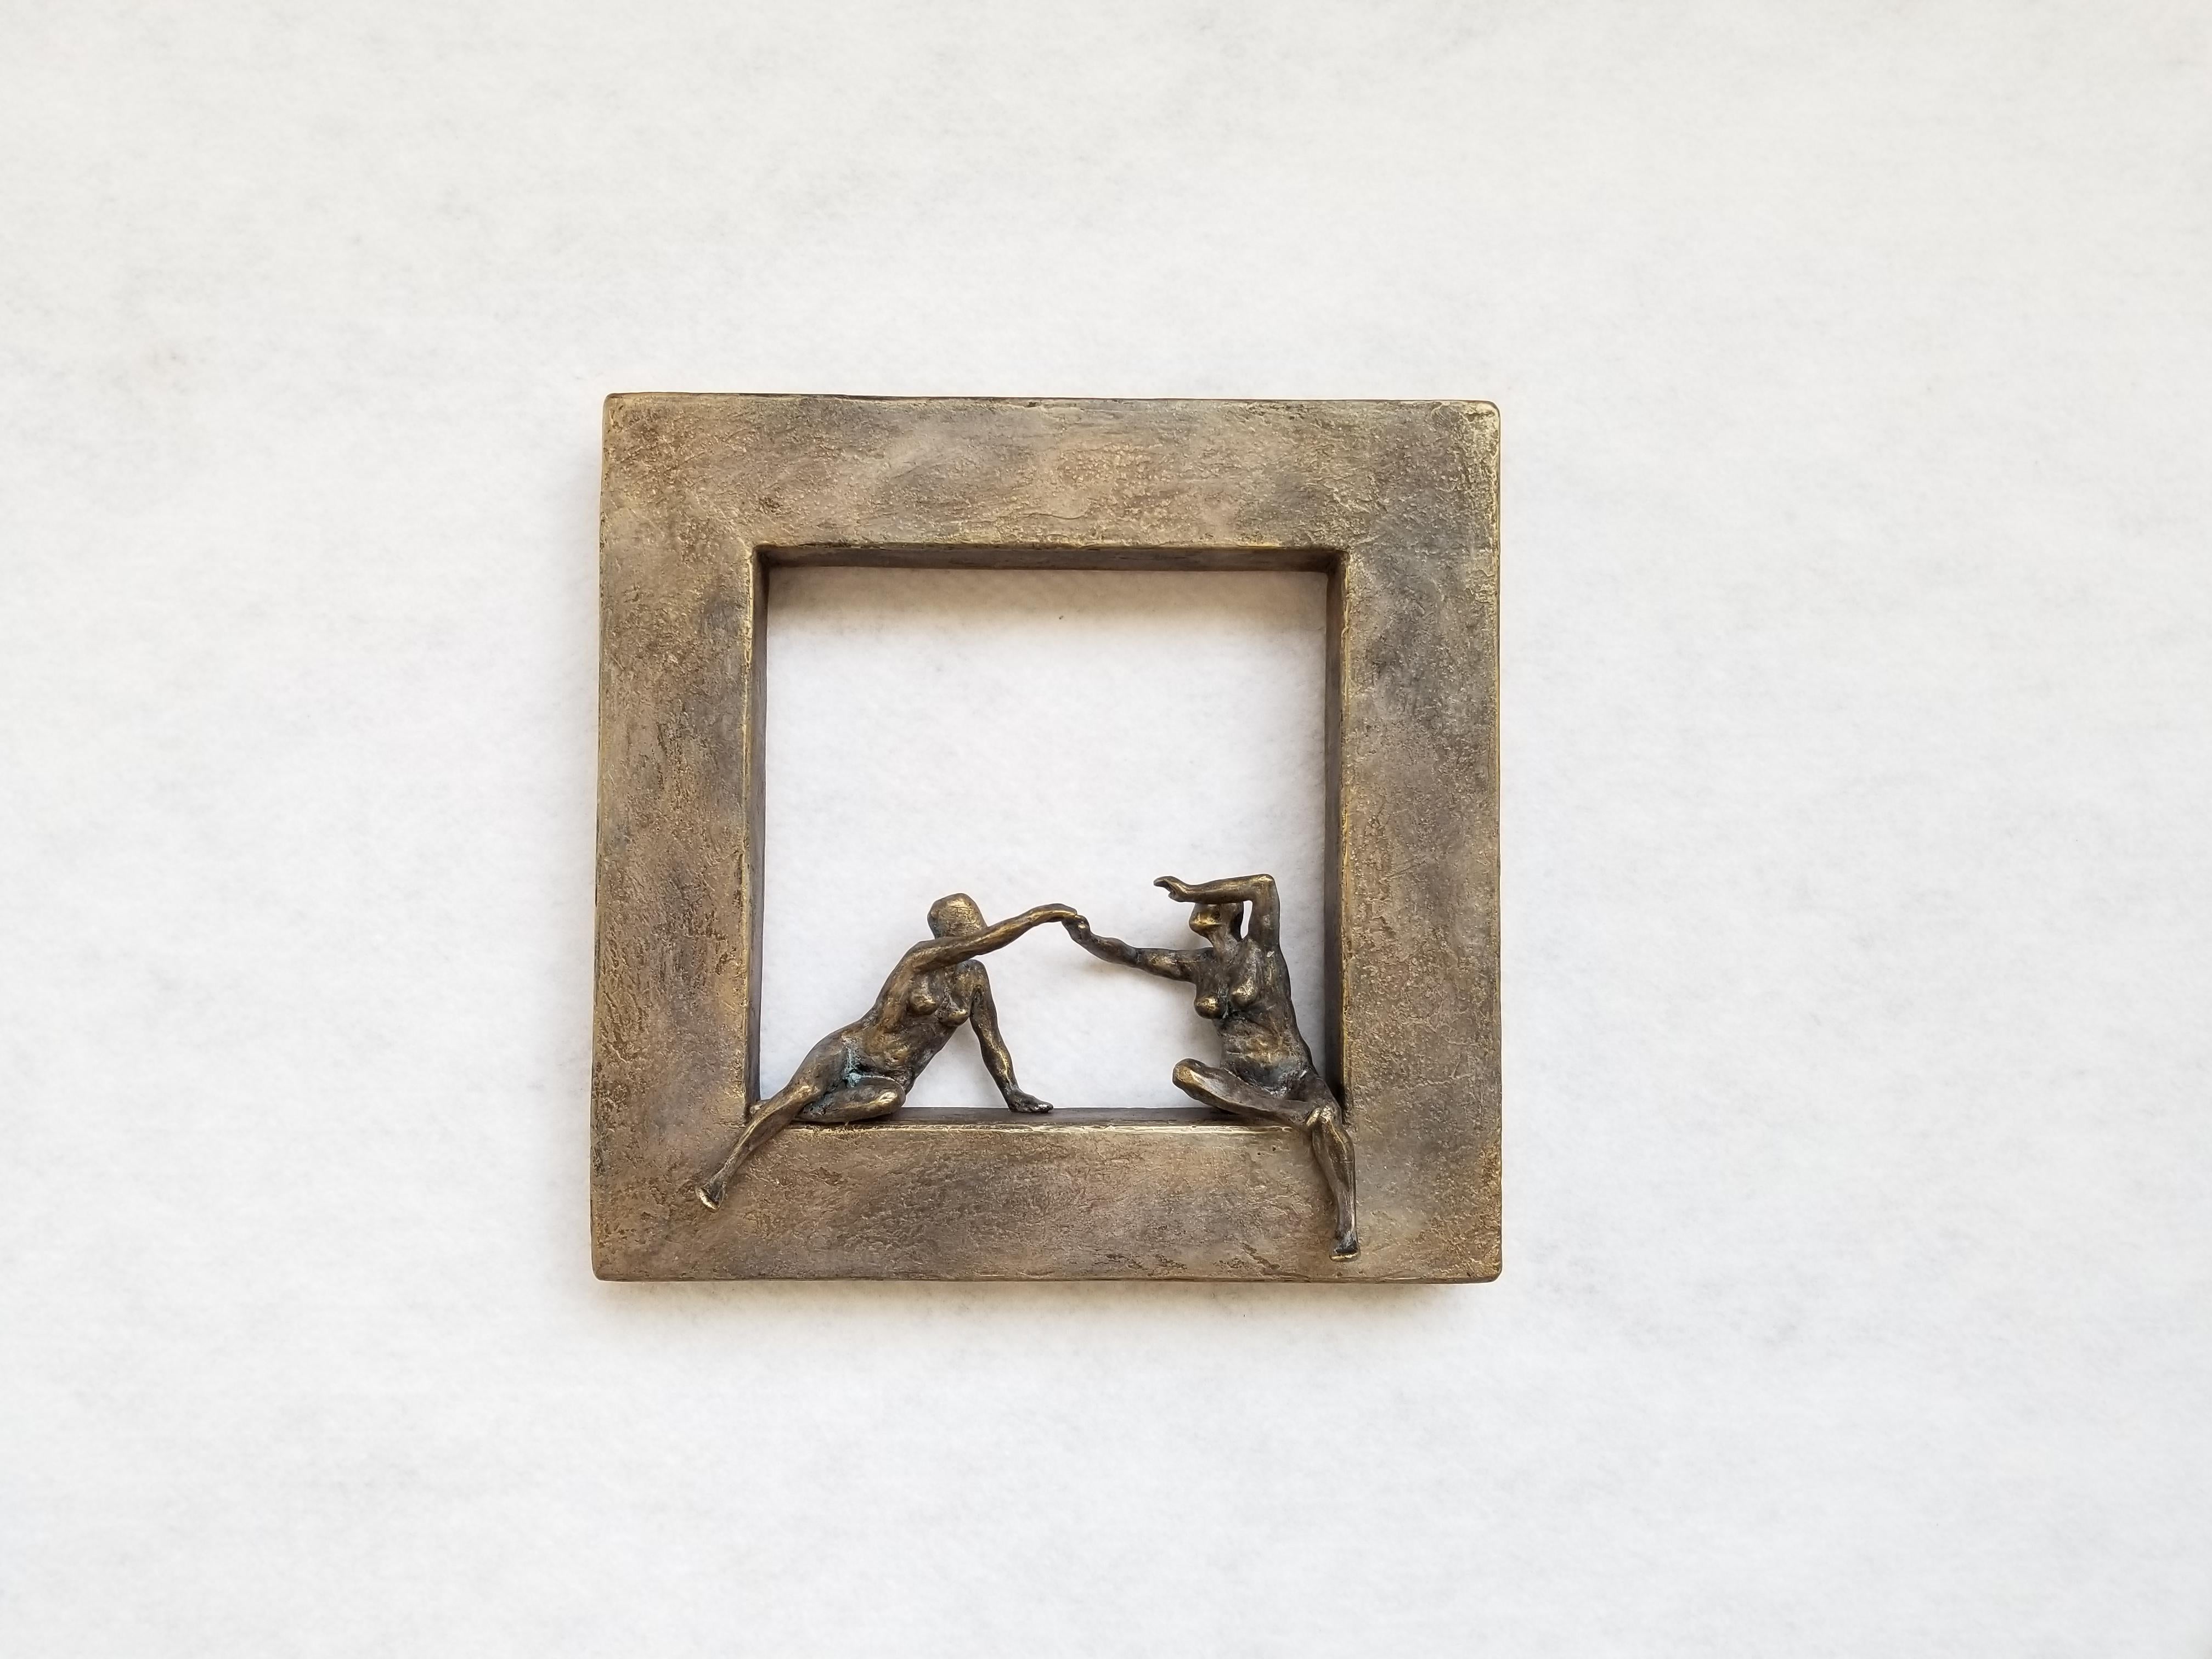 <p>Artist Comments<br>Artist Yelitza Diaz demonstrates two nude female figures trying to connect on a geometric window coated in classic bronze. She seeks to question the basic idea of minimalism by adding the human form to the compositionâ€”a